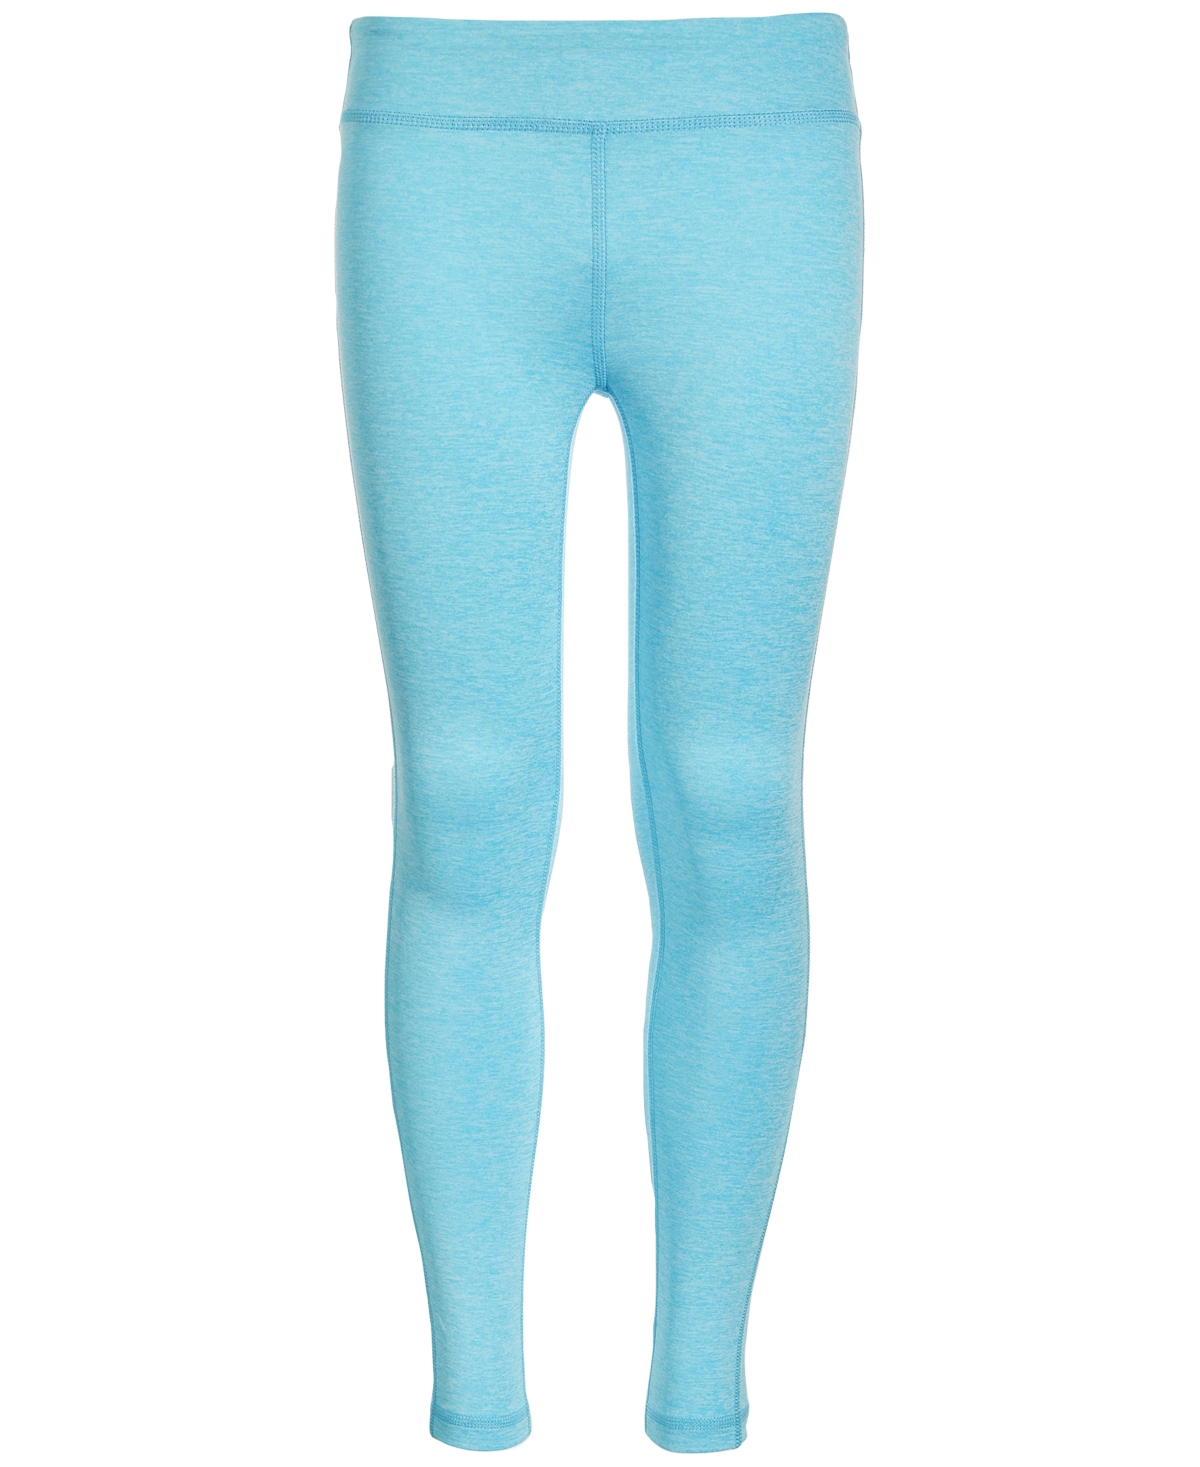 ID IDEOLOGY BIG GIRL CORE STRETCH LEGGINGS, CREATED FOR MACY'S